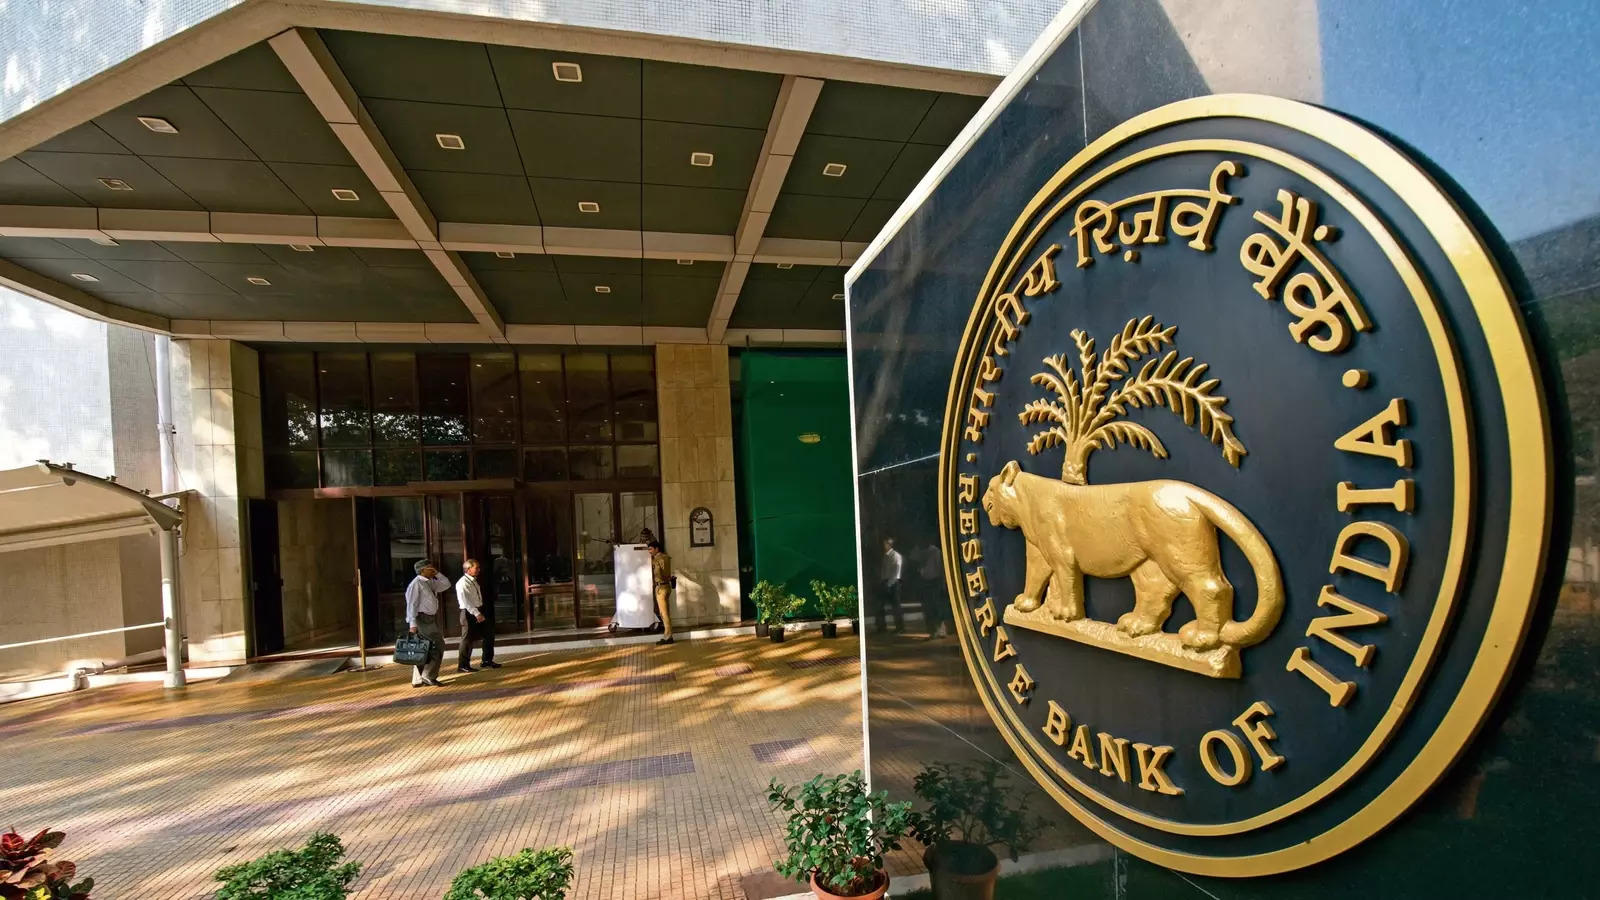  The Reserve Bank of India seems to have provided an answer to those doubts at its policy meeting last week by sharply increasing its inflation forecasts and hiking the rate